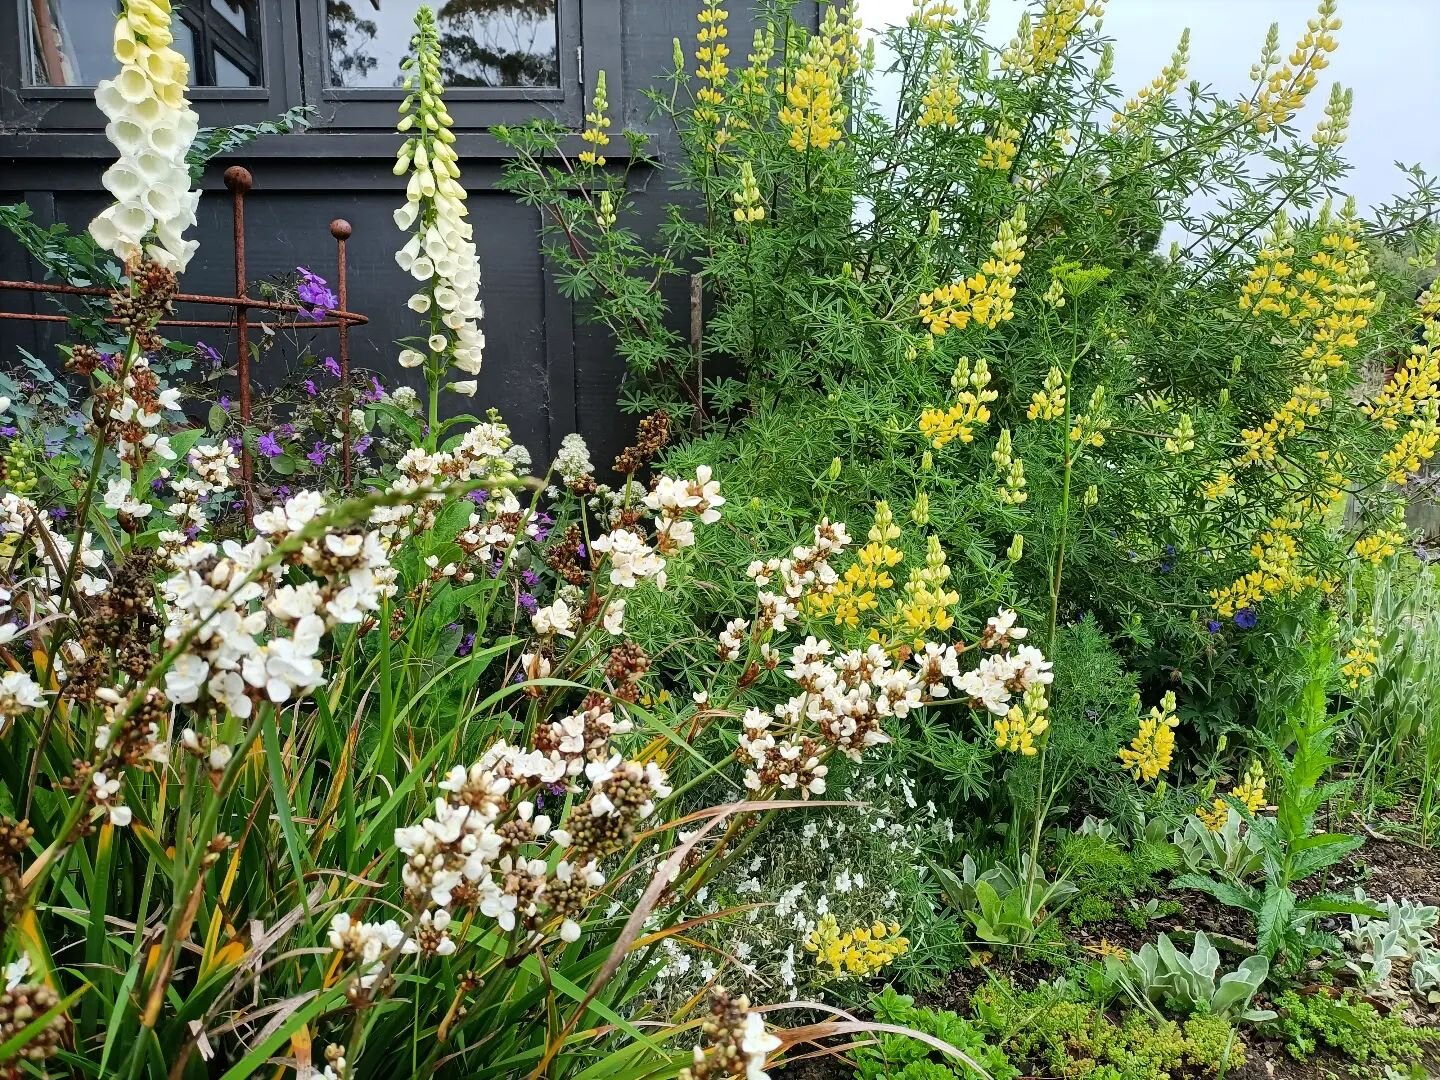 My beach lupin experiment. Results: drought-tolerant, hardy, fast-growing, yellow that doesn't really match the colour scheme. Surprise! Actually, because it's wind resistant and evergreen too, it's earned a place in my garden. I just need to remembe